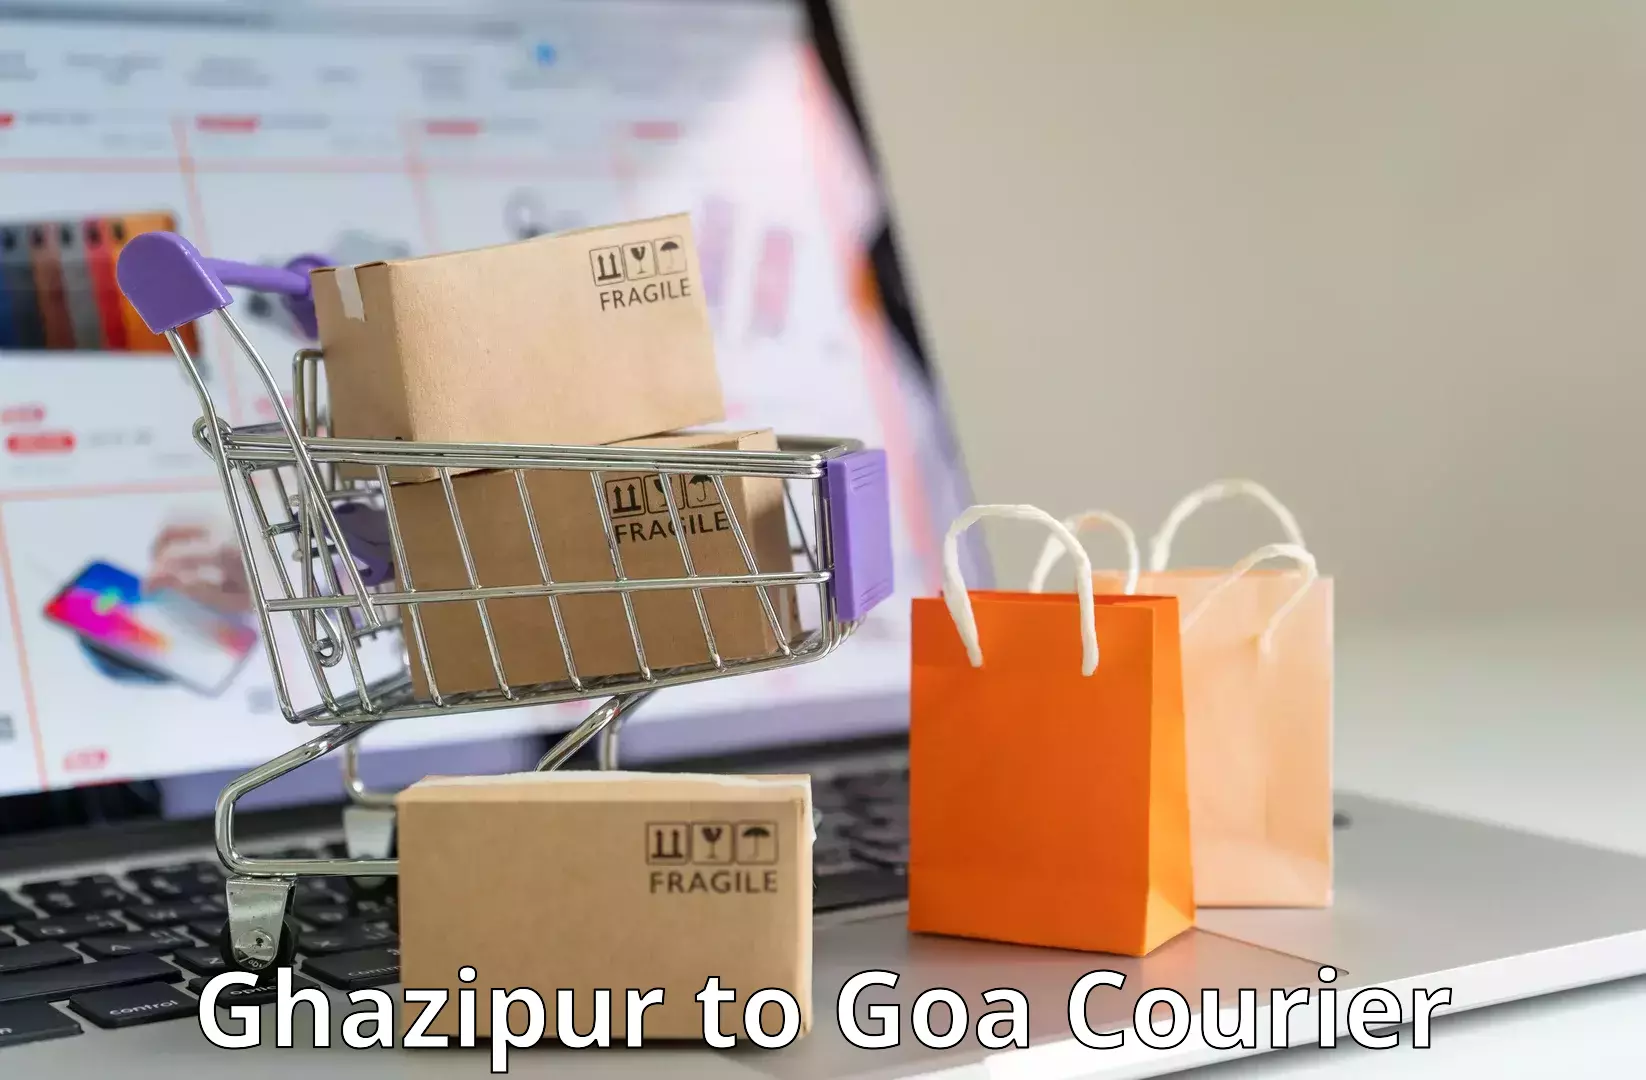 Express delivery network Ghazipur to Goa University